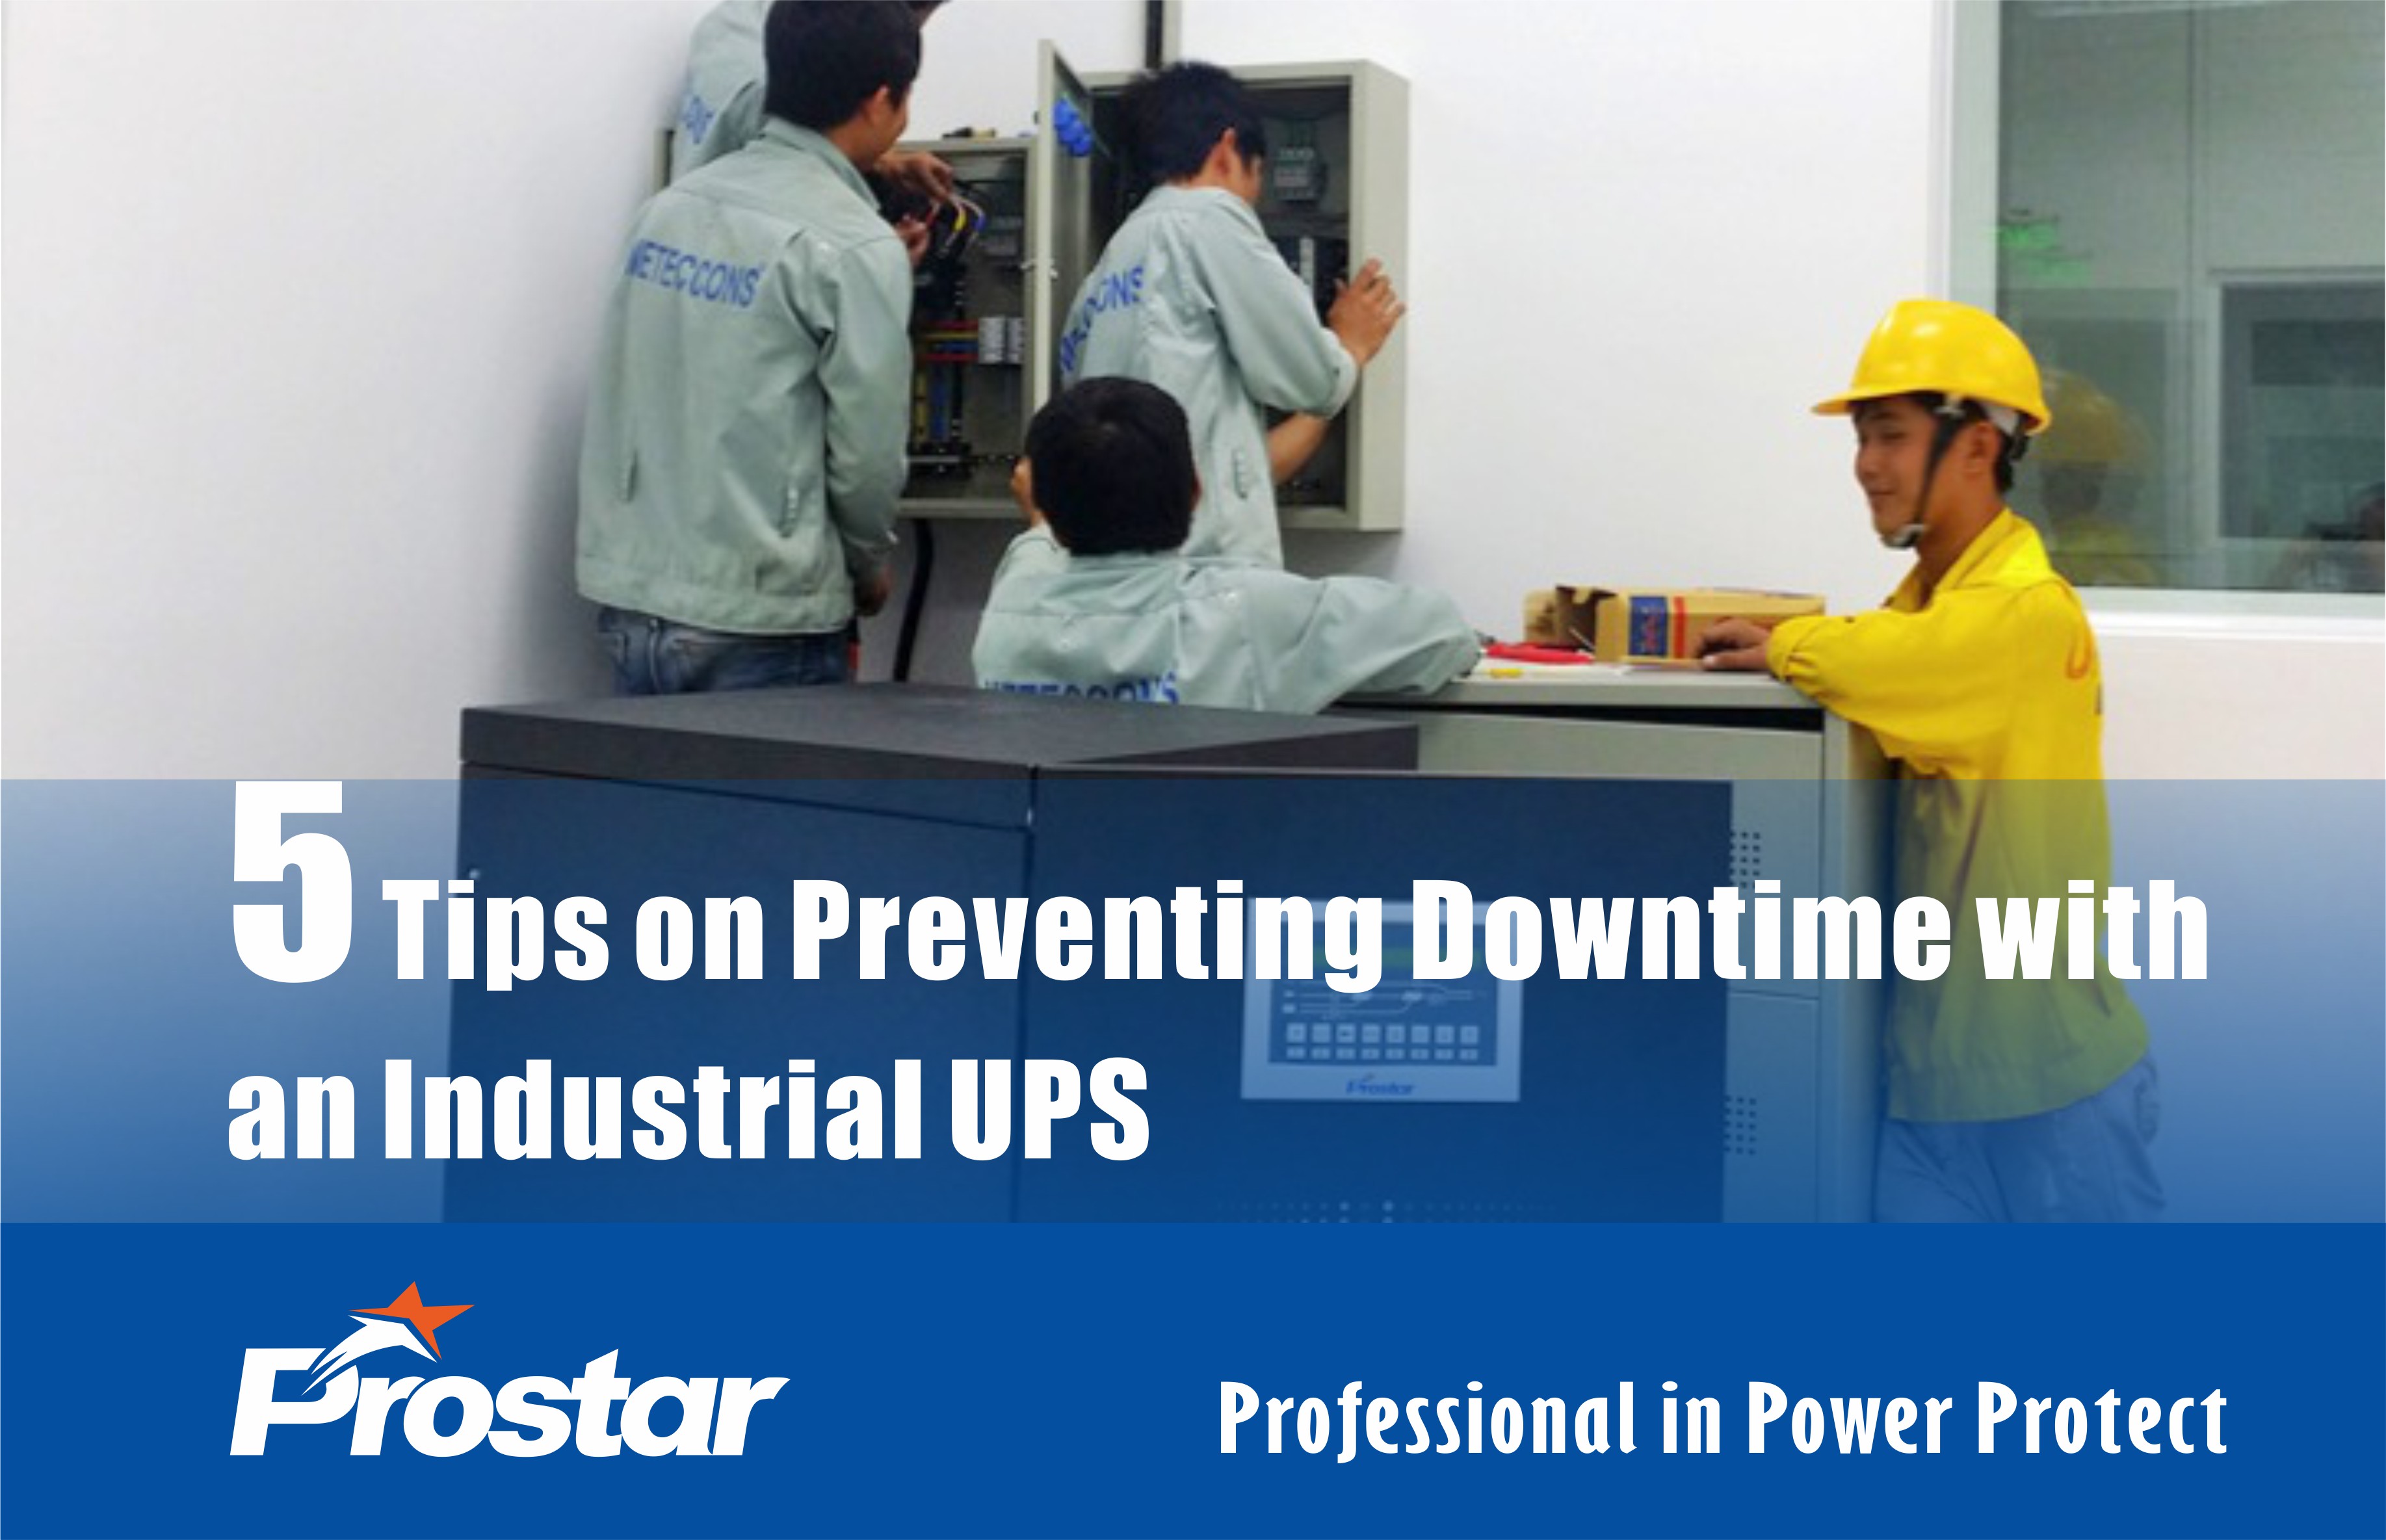 5 Tips on Preventing Downtime with an Industrial UPS